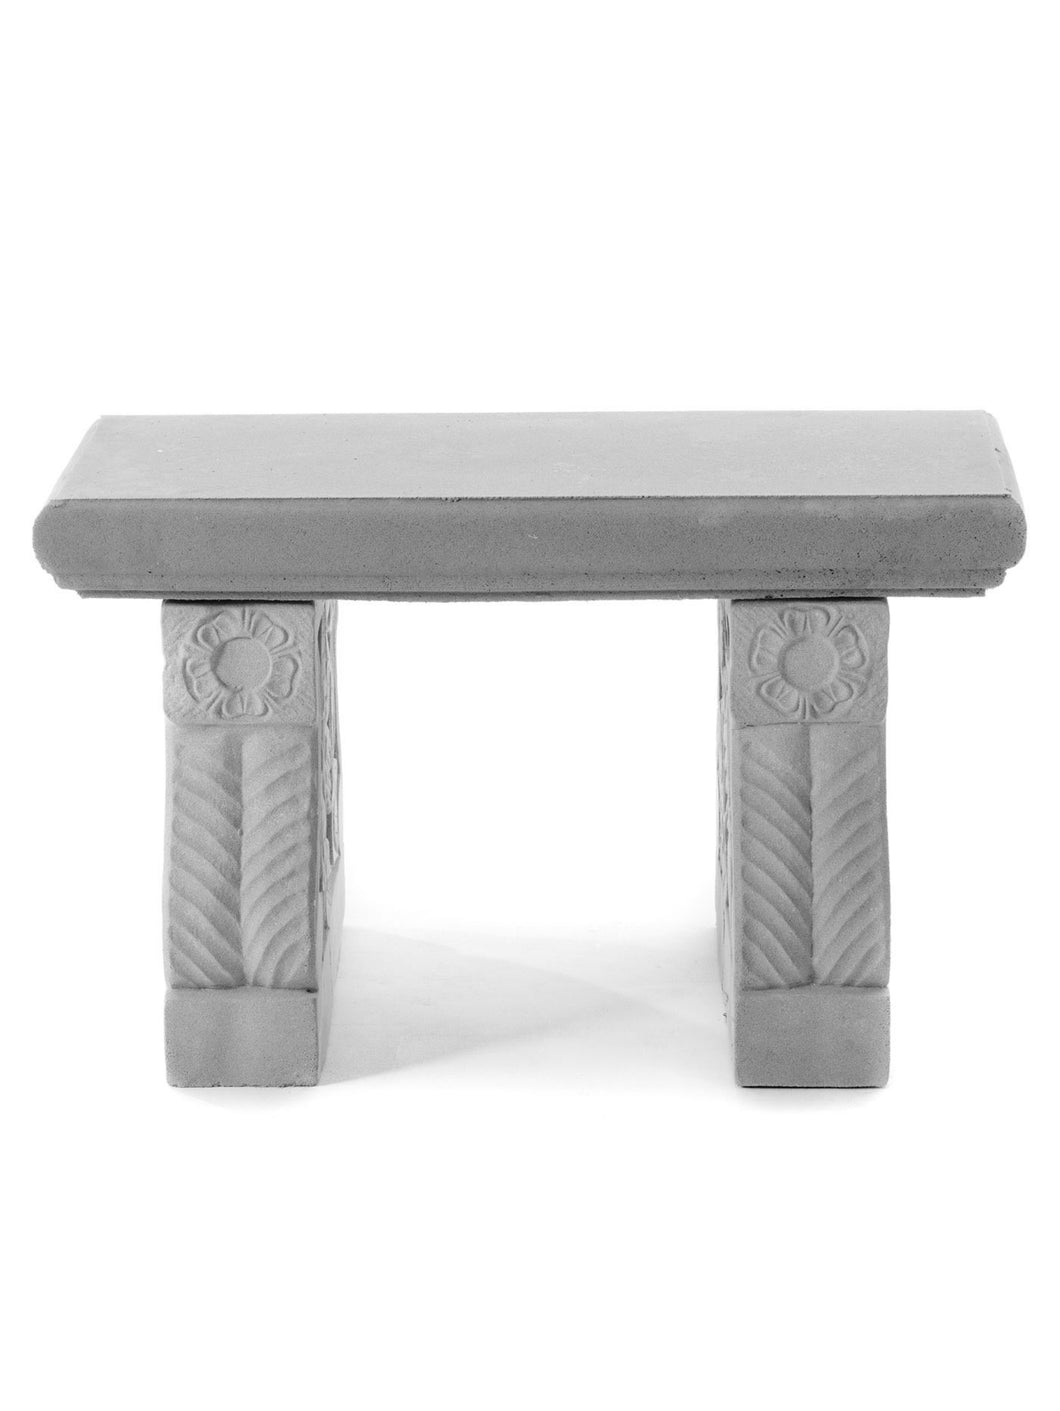 Orchard Bench - Stone Bench - Signature Statues - Made in England, UK 